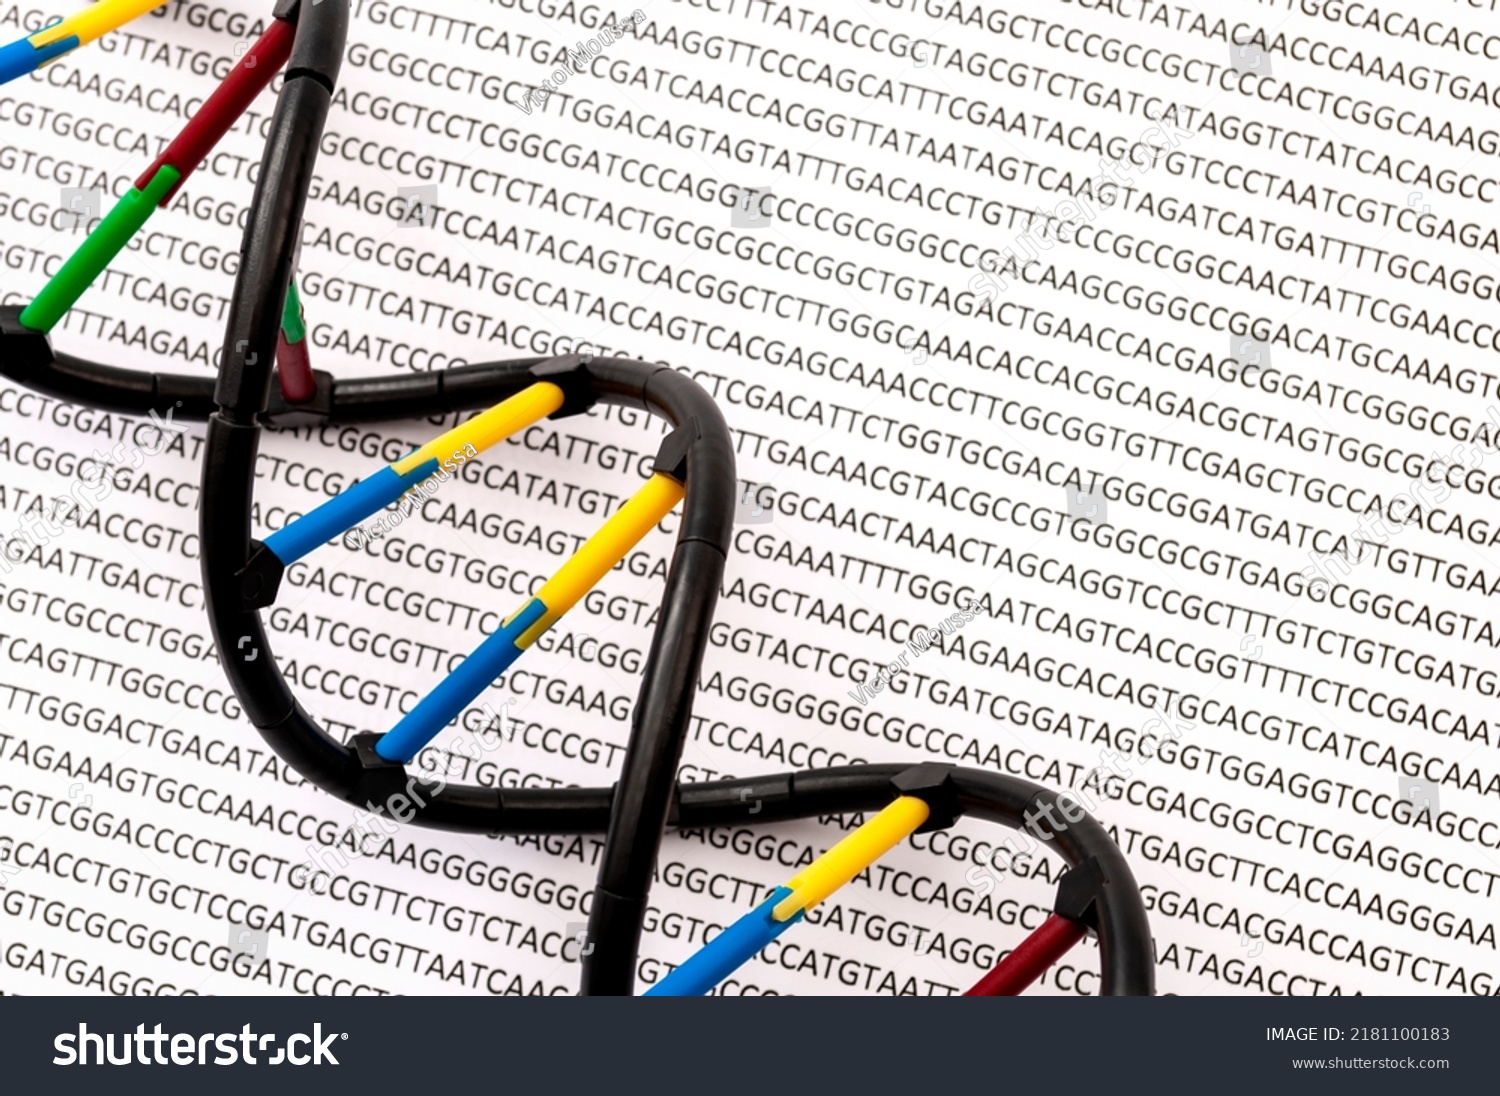 DNA double helix and genome sequence concept for molecular biochemistry backgrounds, genetic code and gene research #2181100183